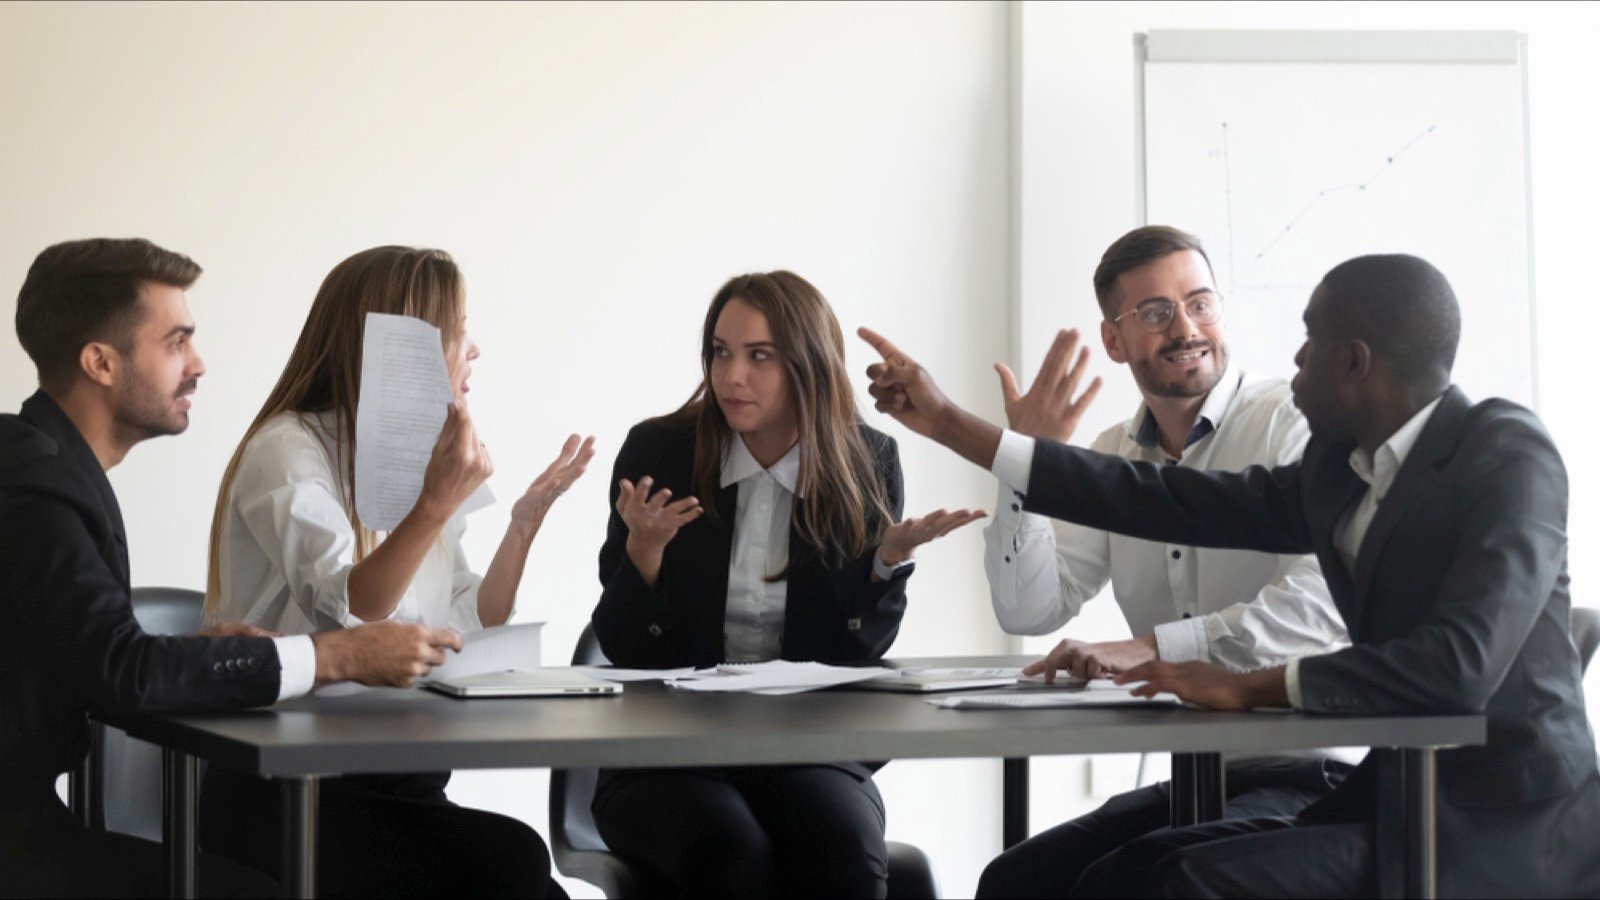 <p>Professional conflicts are unavoidable in the workplace. Conflict managers know how to de-escalate a situation effectively and amicably.</p><p>Conflict management entails facilitating productive discussions, fostering an environment of trust, and negotiating mutually beneficial solutions. These people also have high <a href="https://www.kindafrugal.com/7-effects-of-high-and-low-stress-on-emotional-intelligence/">emotional intelligence</a> and excellent communication skills.</p>